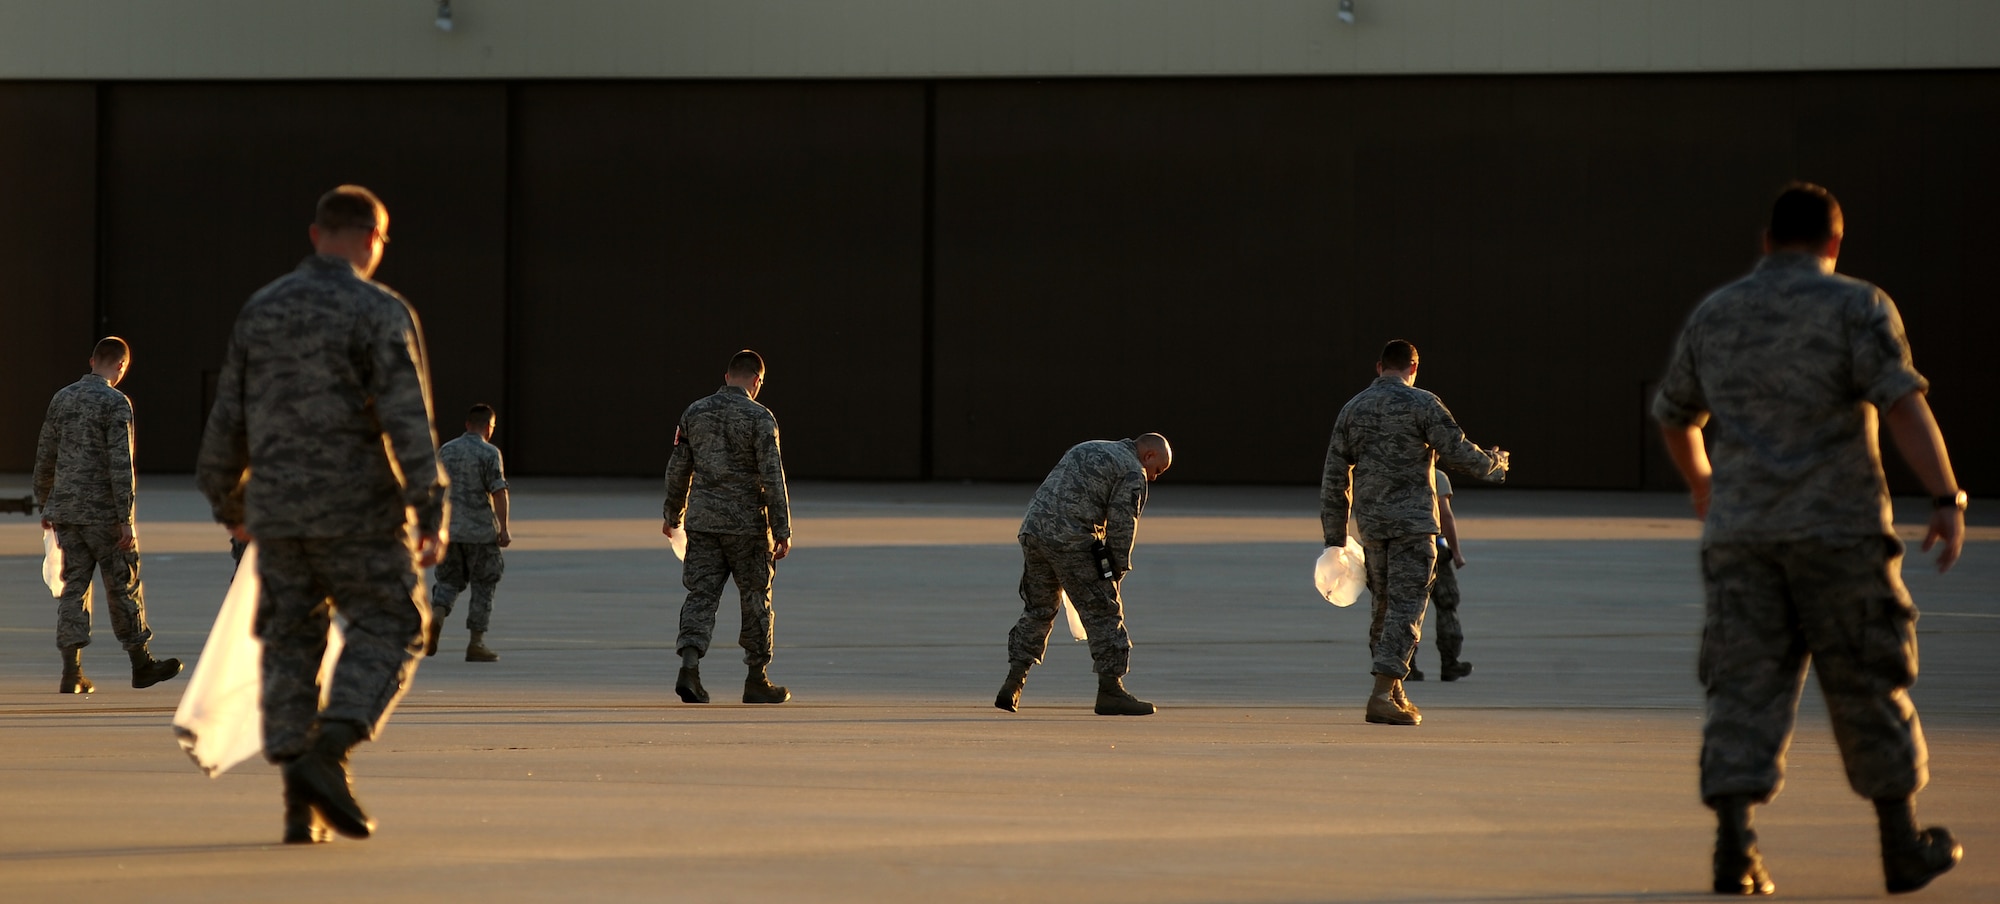 WHITEMAN AIR FORCE BASE, Mo. -- Maintainers and crew chiefs with the 509th Maintenance Squadron and 131st Bomb Wing perform a Foreign Object Debris walk before starting their day, Sept. 28, 2010. FOD mishaps can potentially result in extensive aircraft damage, ultimately hindering the Air Force's flying mission. To counter such events, crew chiefs, maintainers and other personnel working on the flightline take responsibility for eliminating FOD to keep the aircraft safe and the flying mission soaring. (U.S. Air Force photo by Senior Airman Kenny Holston)(Released) 

